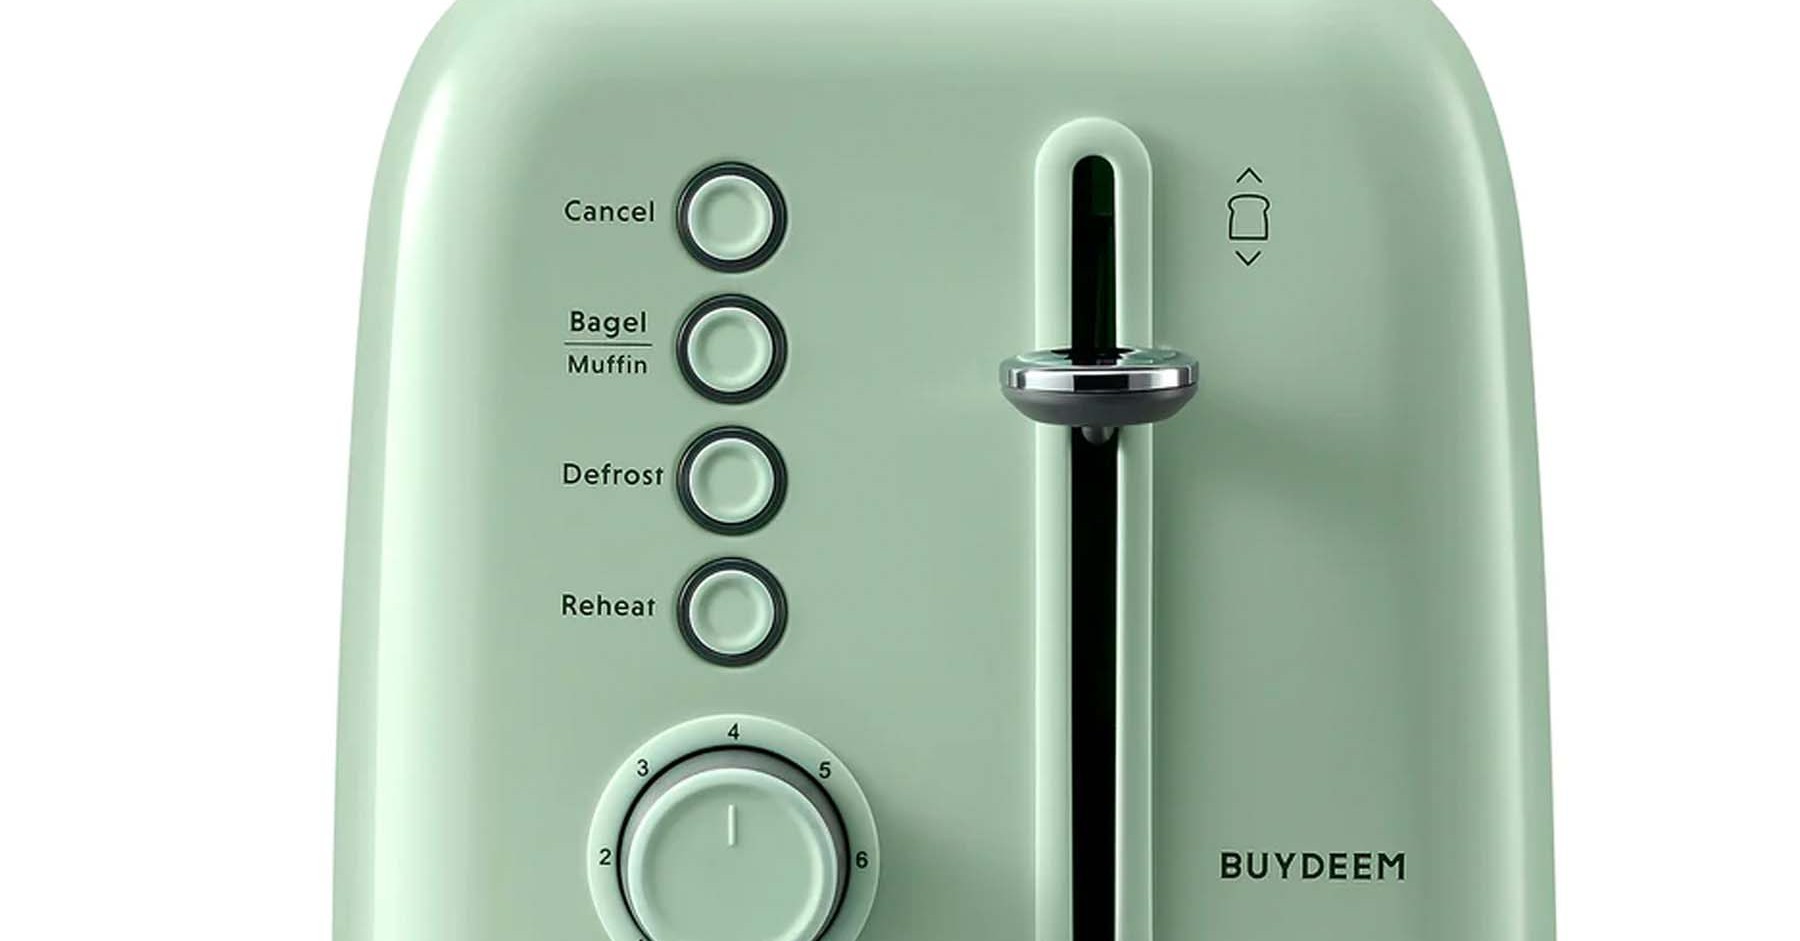 https://video-images.vice.com//products/64065faf94247363ae91937a/gallery-image/1678139312291-best-toasters-buydeem-2-slice-toaster.jpeg?crop=1xw:0.5231092436974789xh;center,center